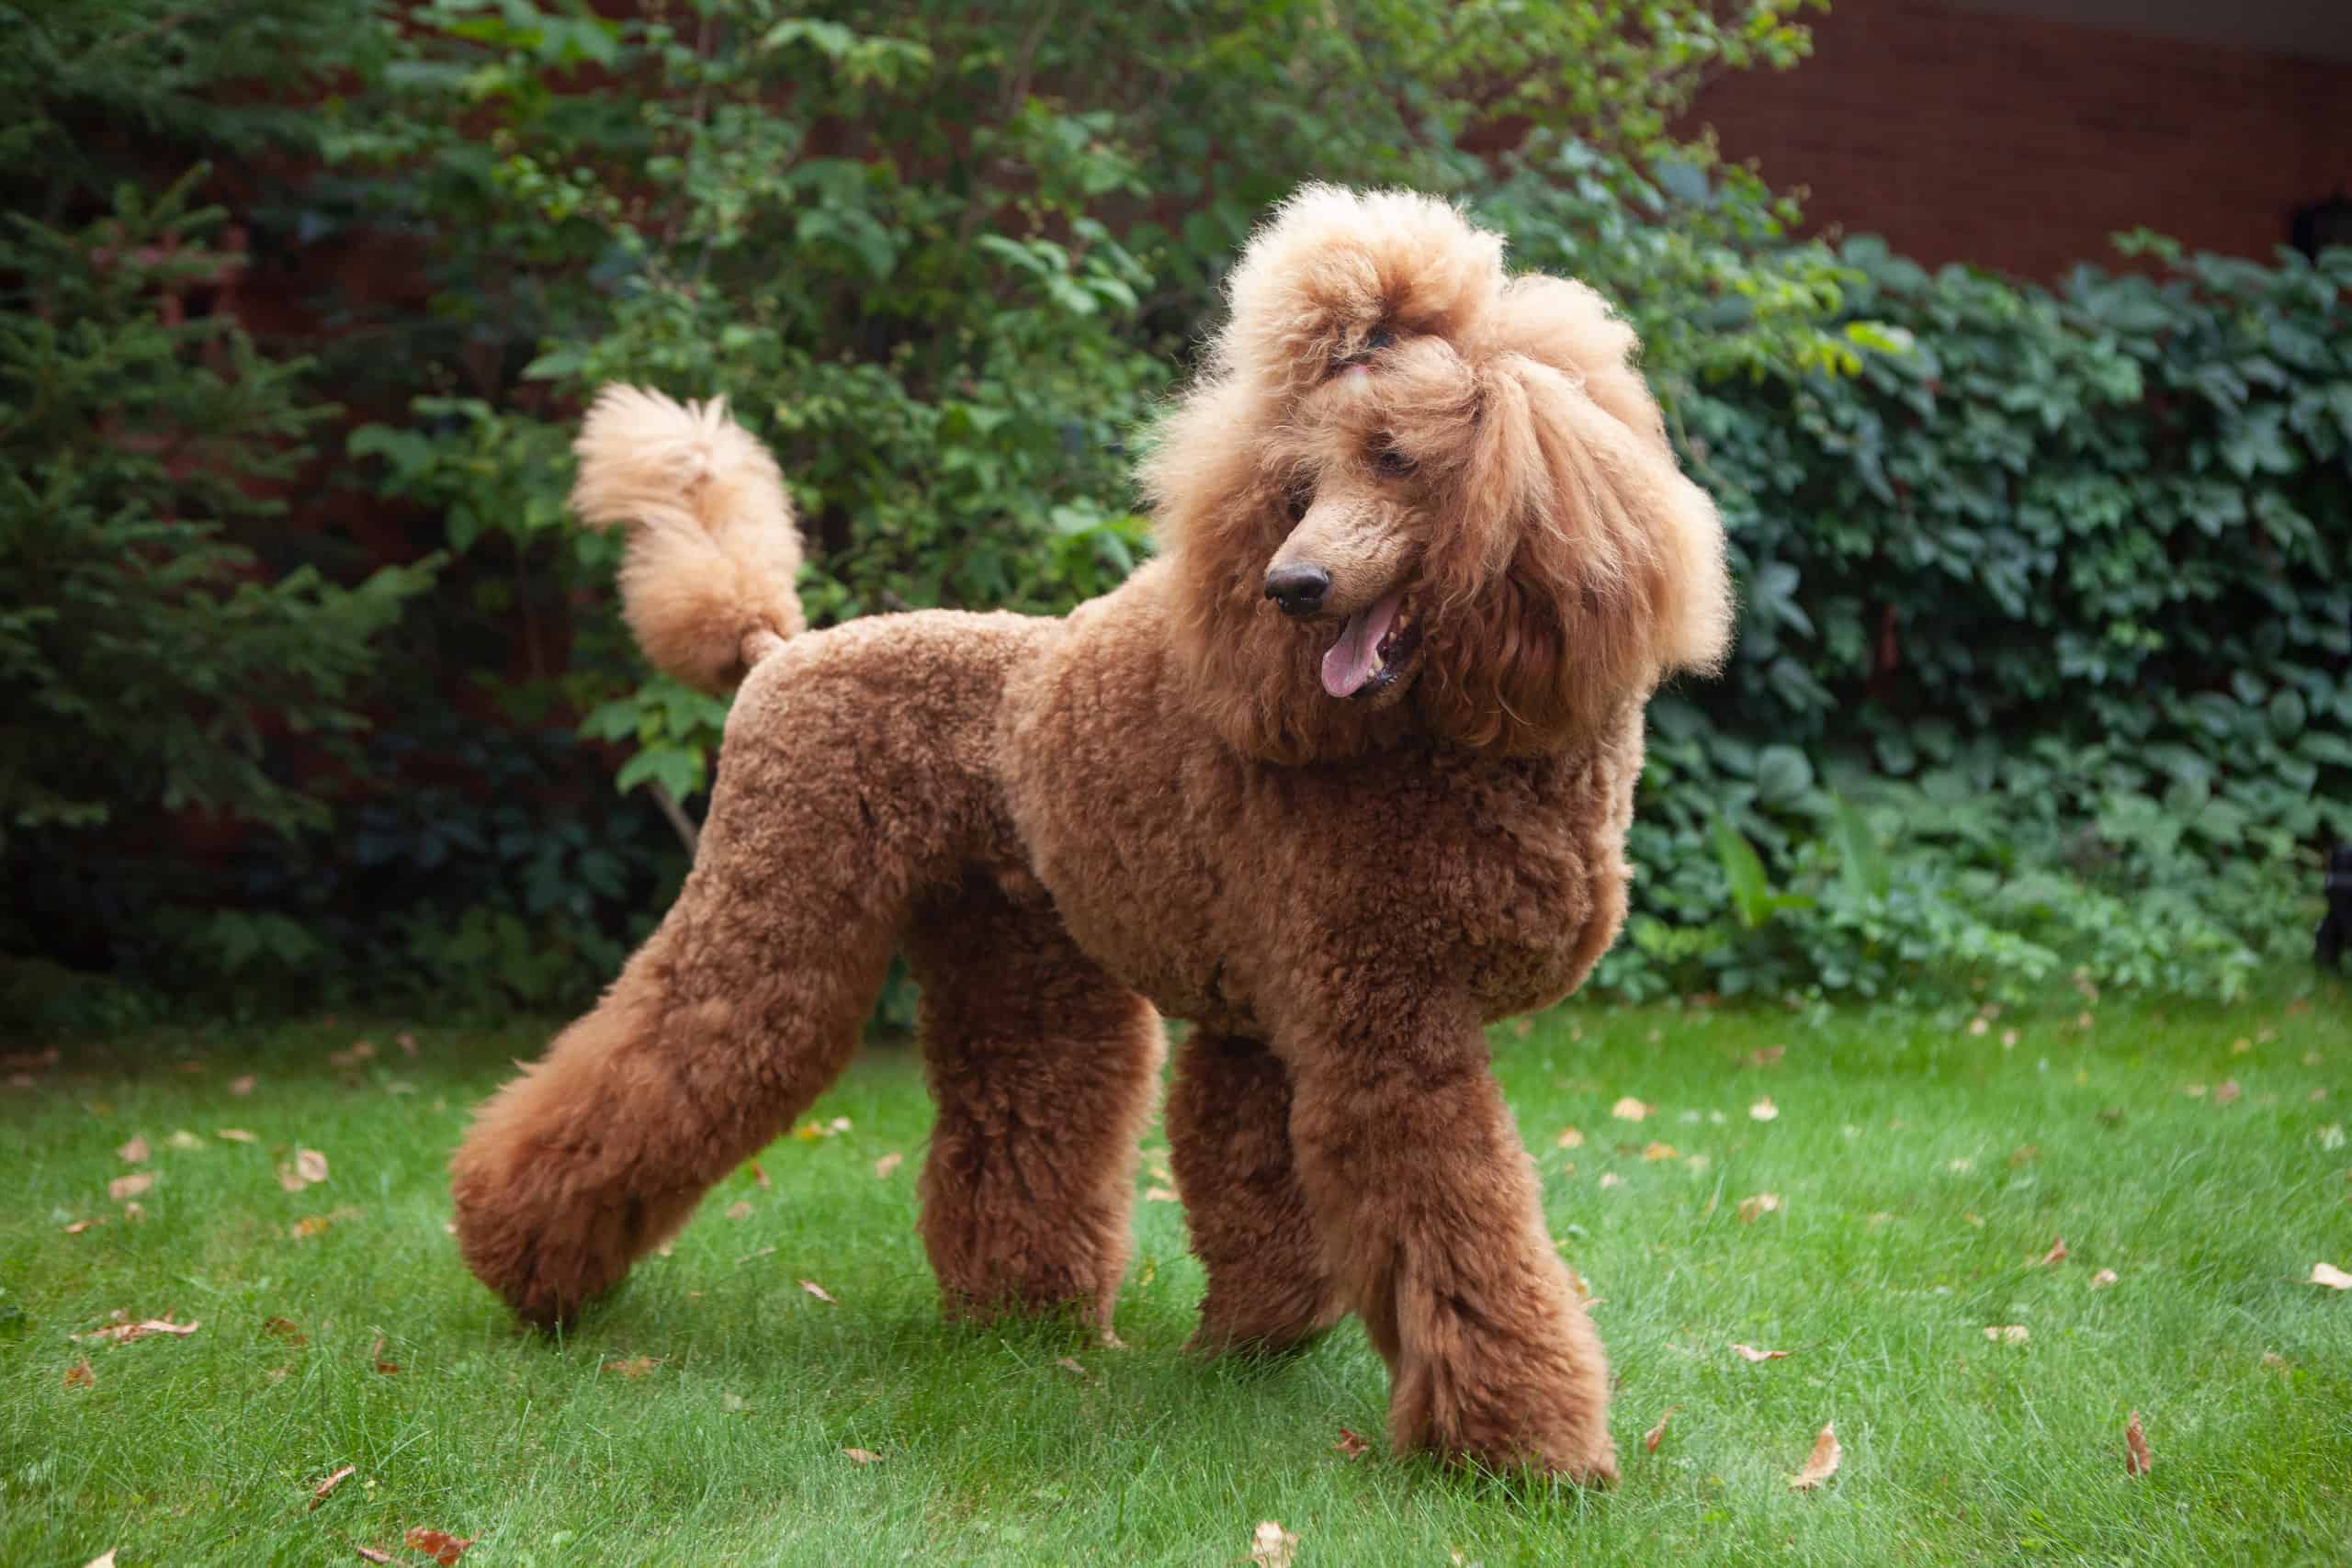 how common are brown poodles?